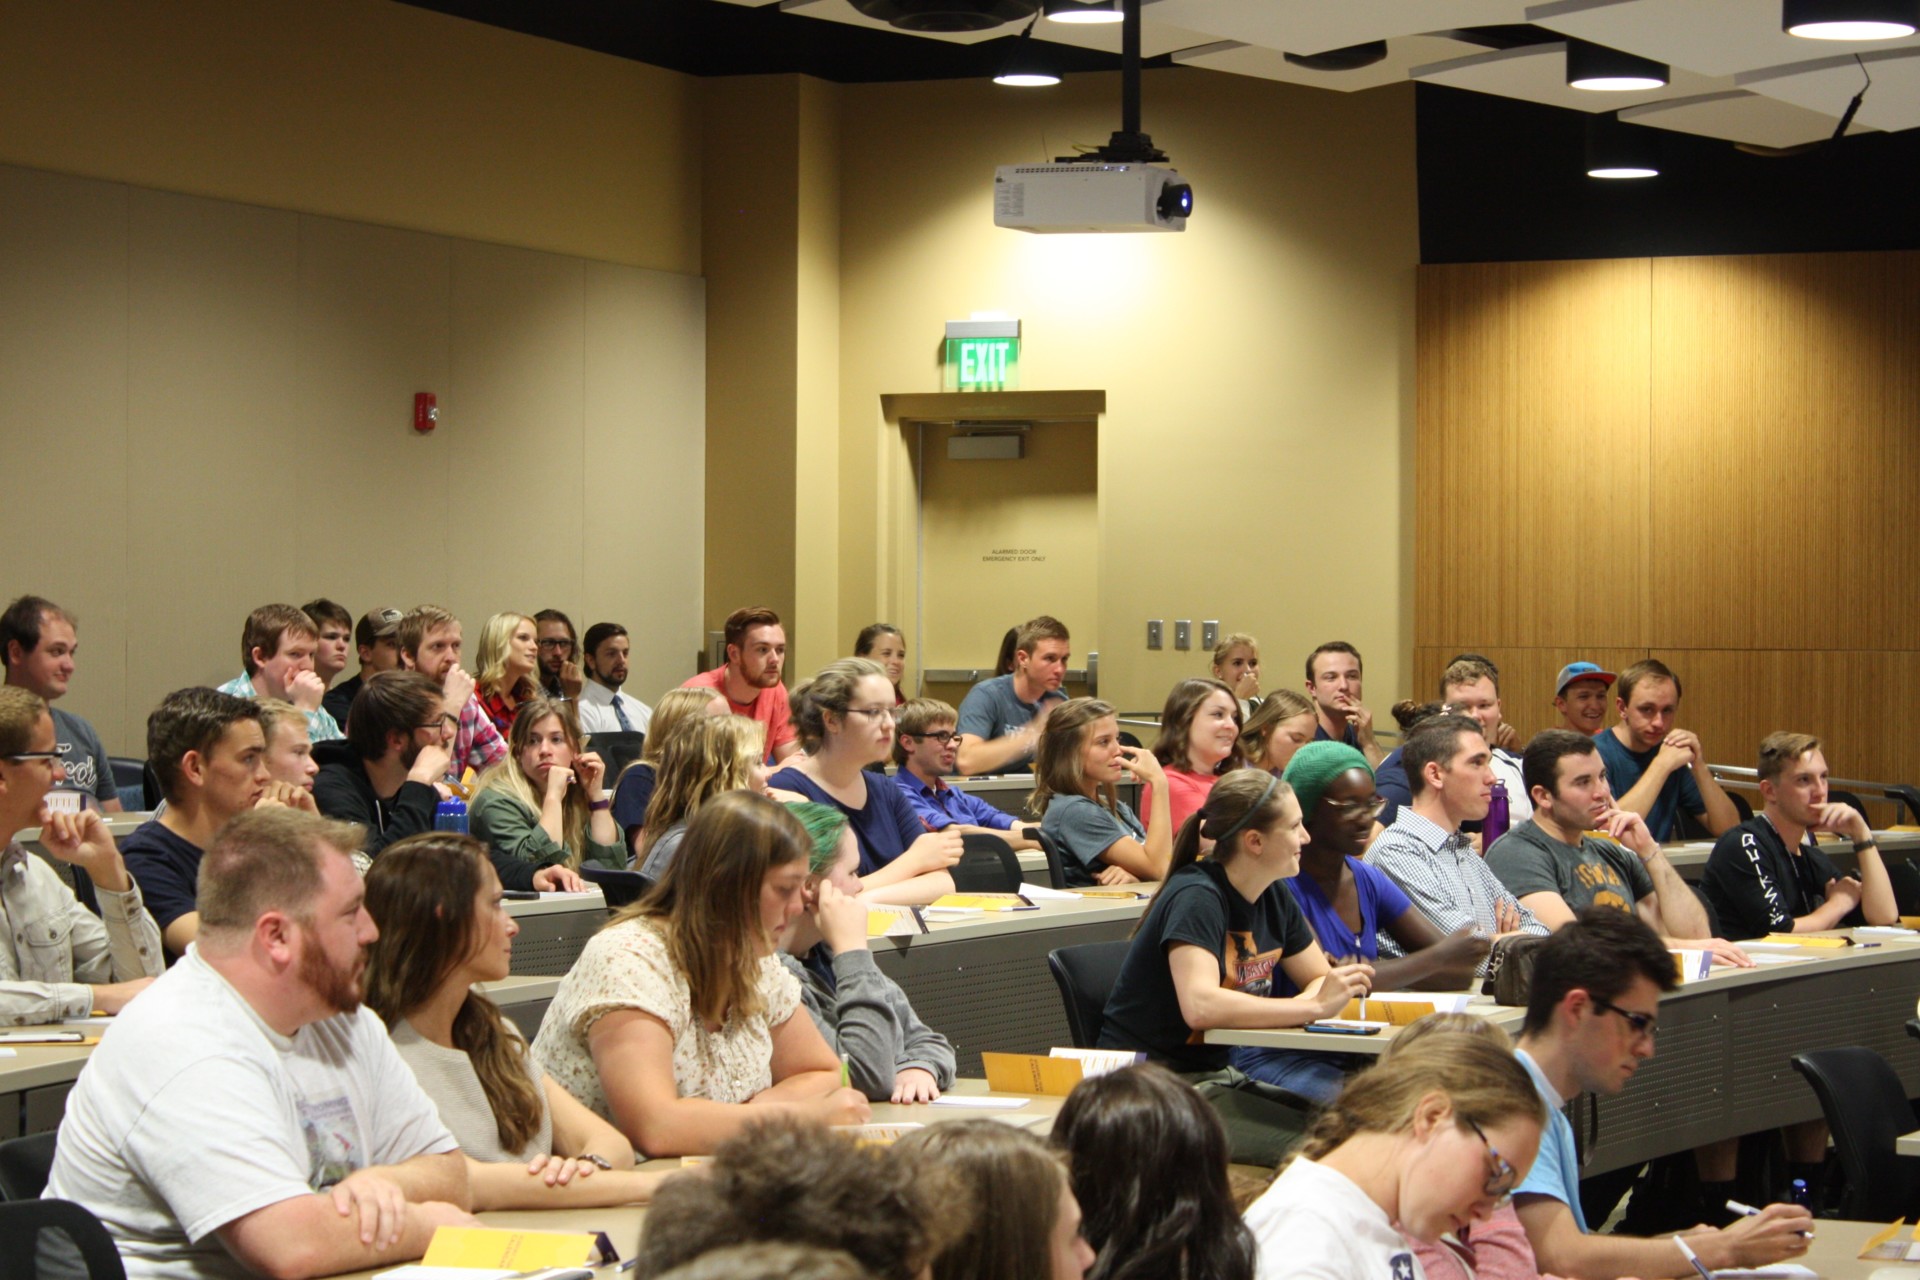 Many students listening attentively in a lecture hall